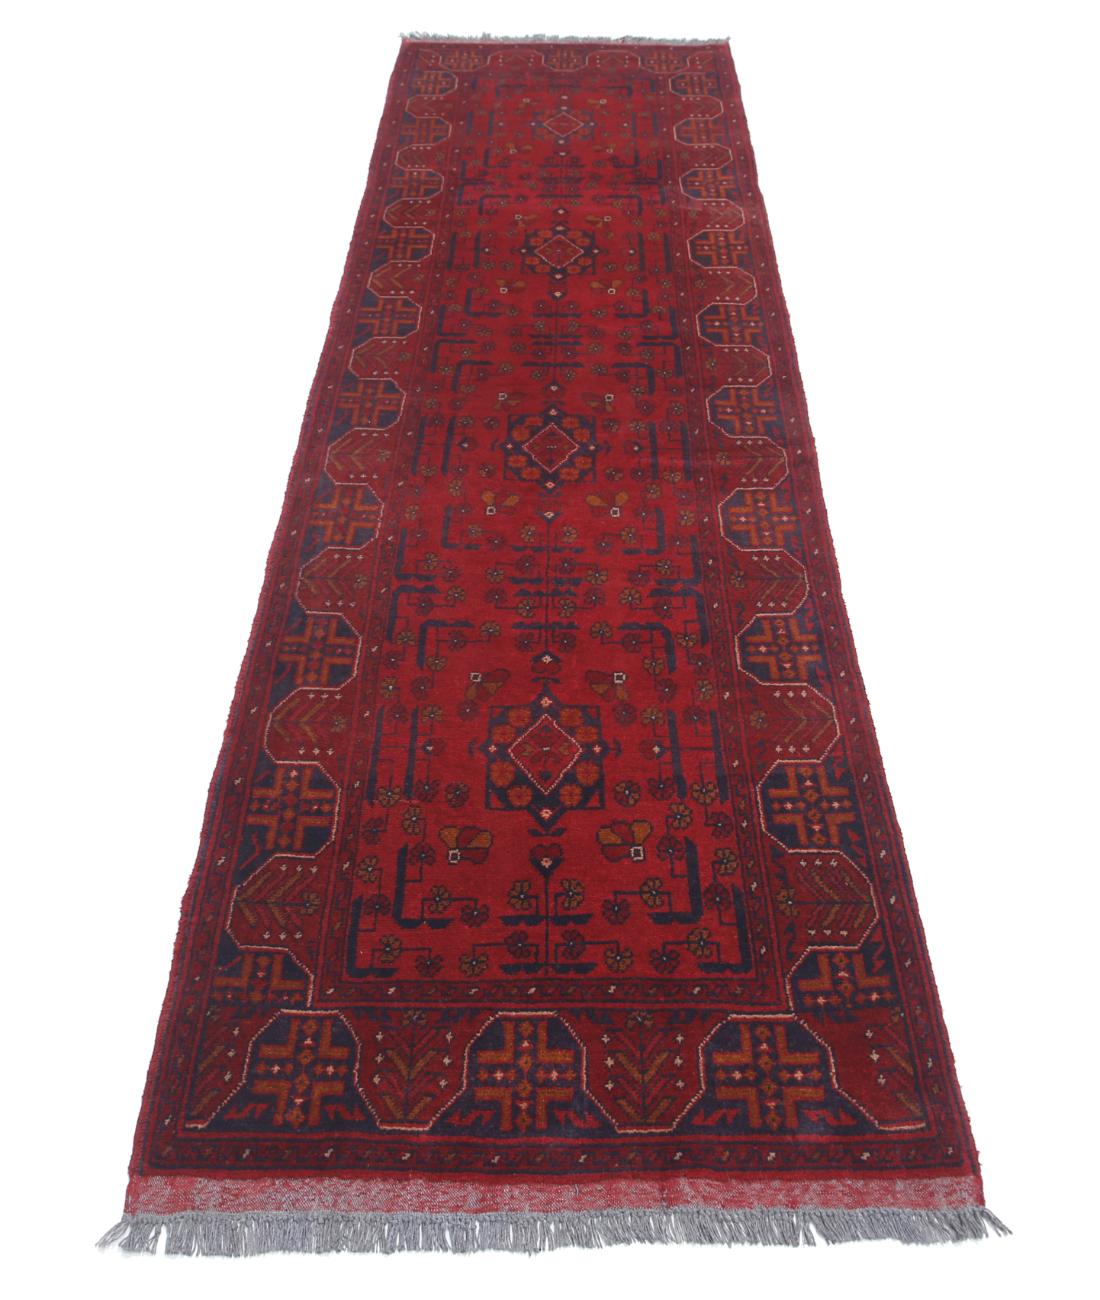 Hand Knotted Afghan Khal Muhammadi Wool Rug - 2'7'' x 9'3'' 2' 7" X 9' 3" (79 X 282) / Red / Blue